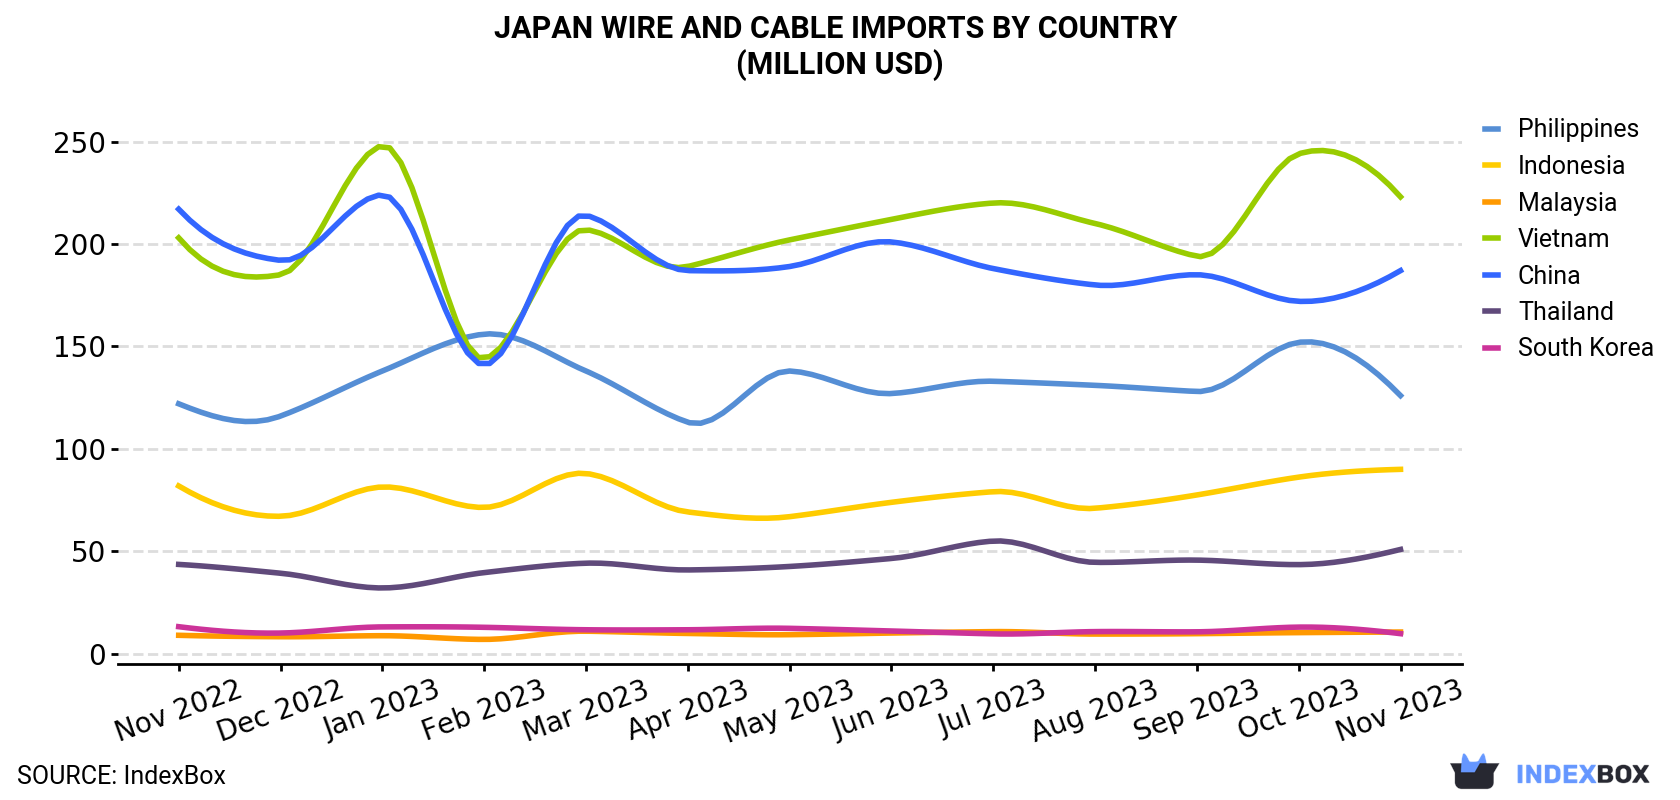 Japan Wire And Cable Imports By Country (Million USD)